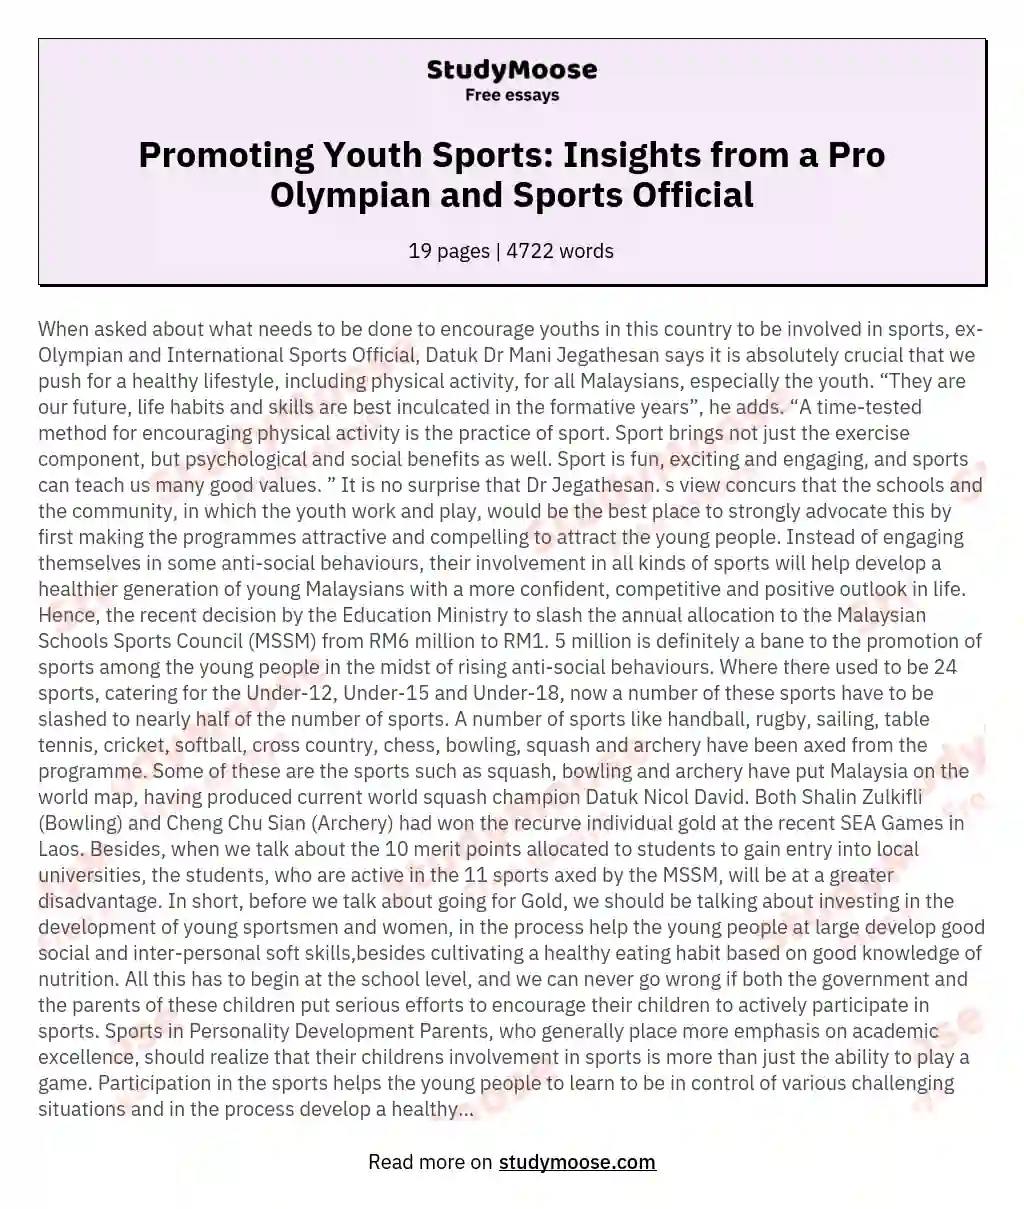 Promoting Youth Sports: Insights from a Pro Olympian and Sports Official essay